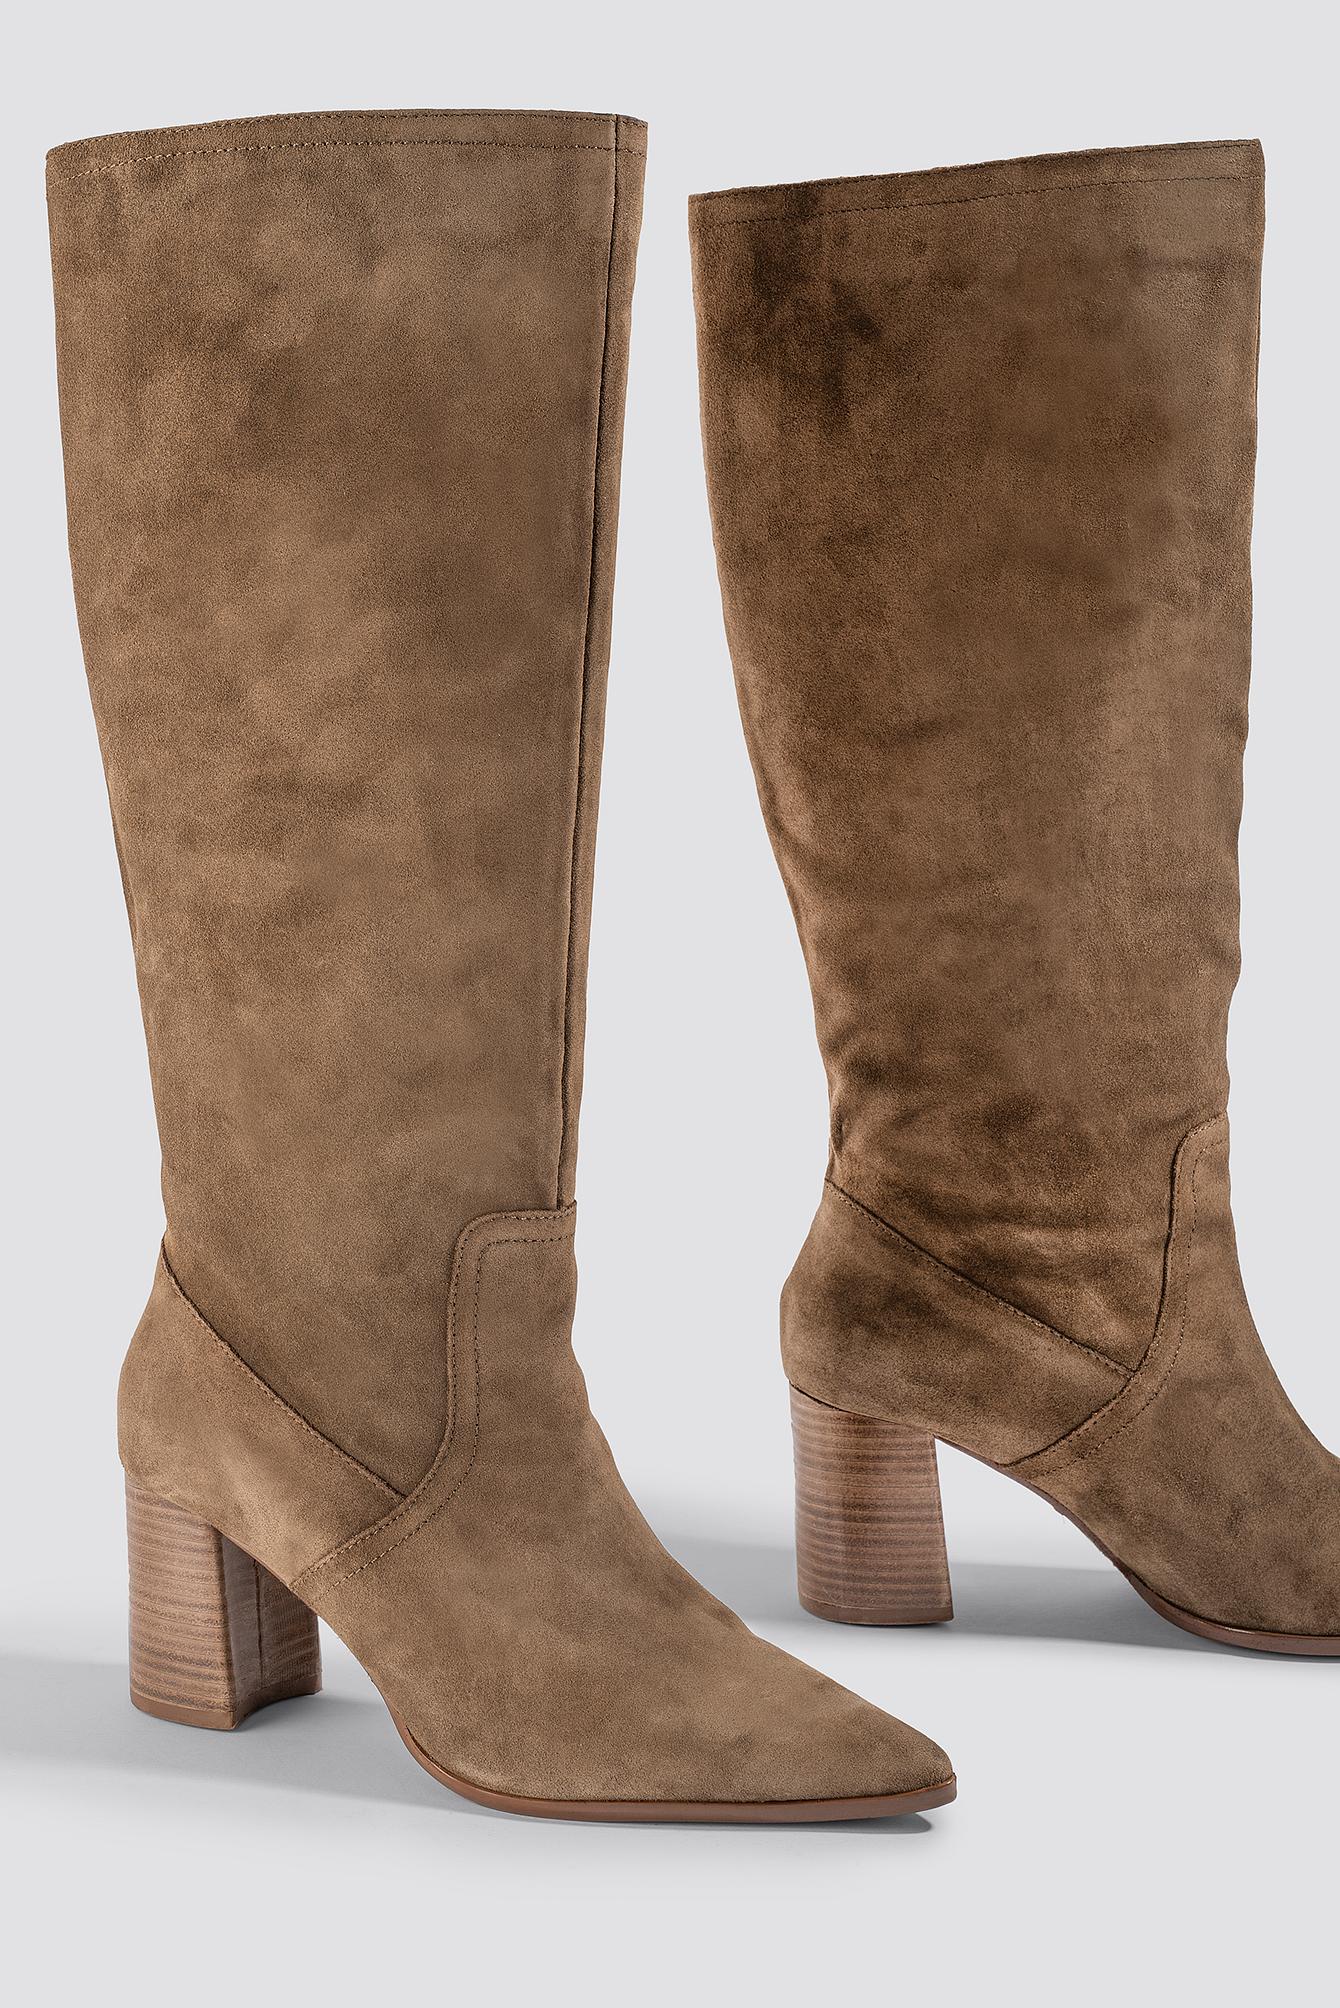 Mango Campo Boots in Braun - Lyst